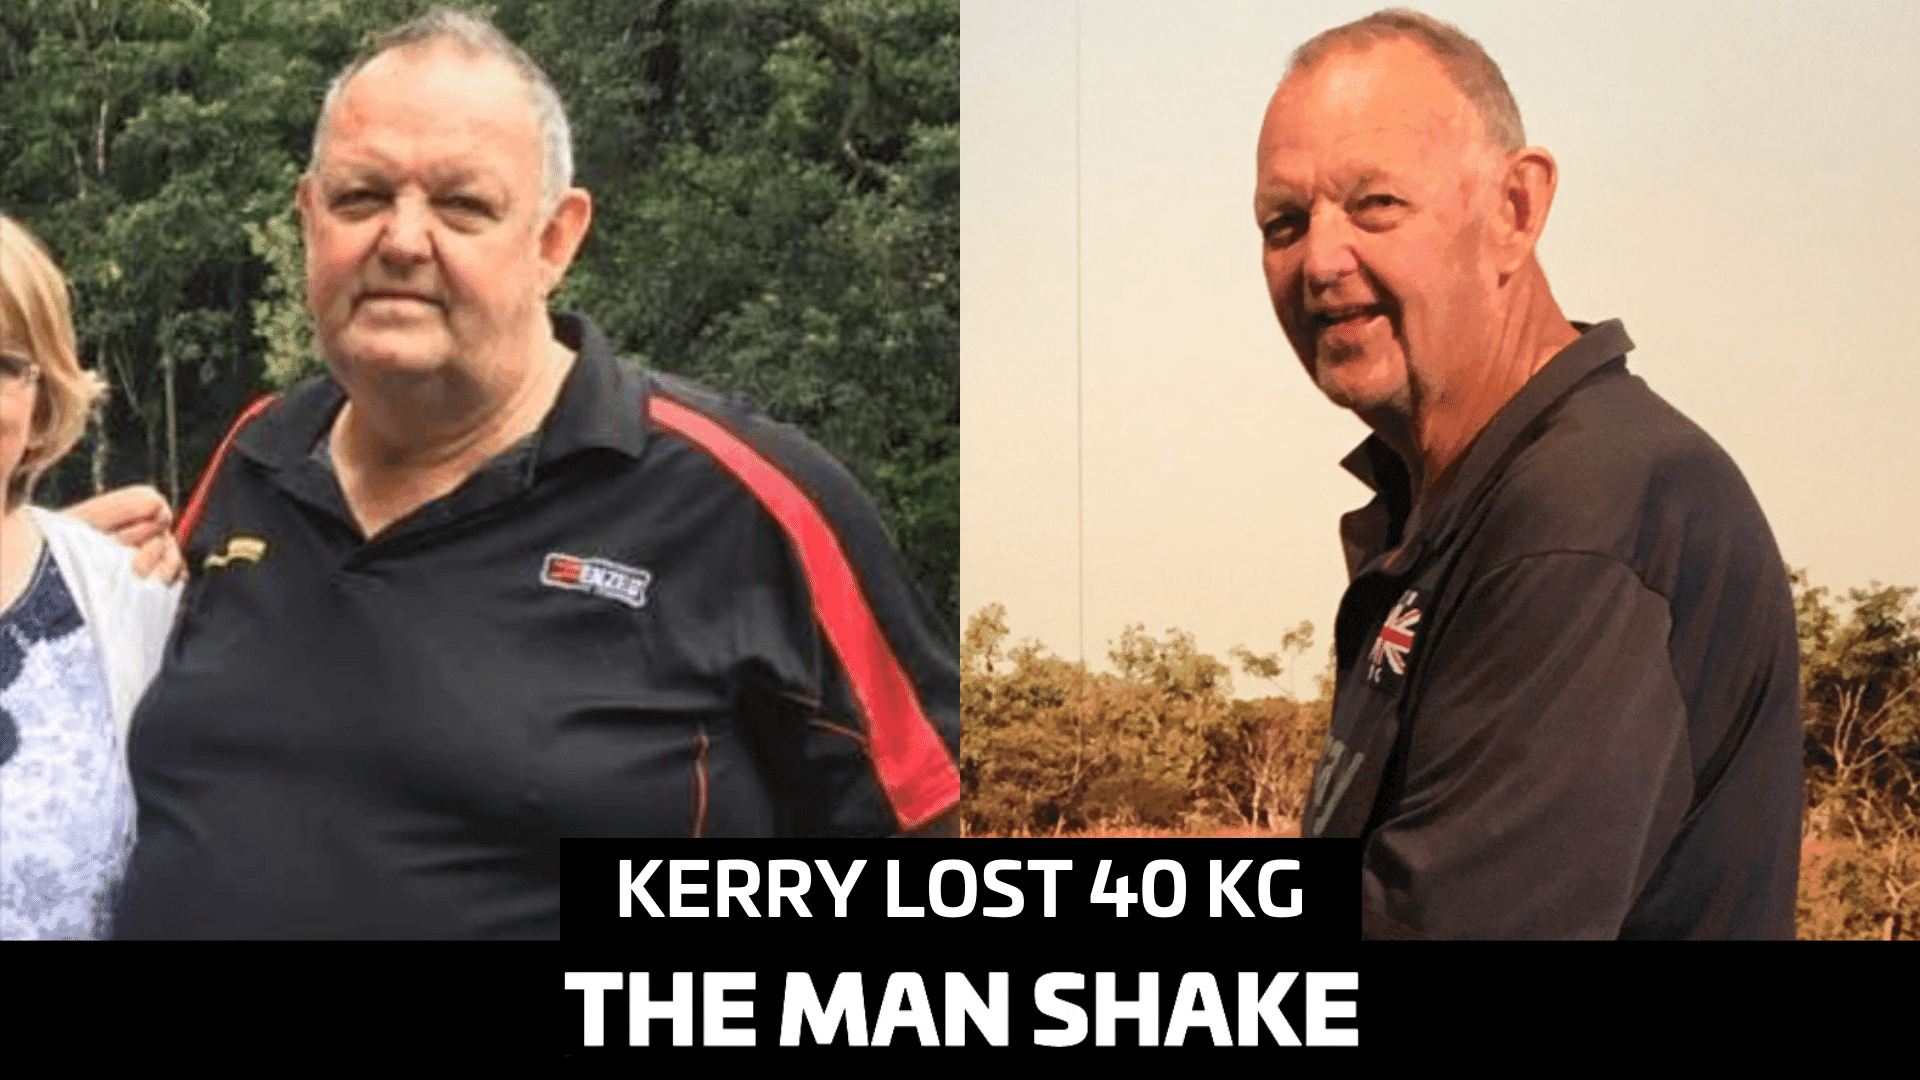 Kerry lost 40kg at 68 years young!